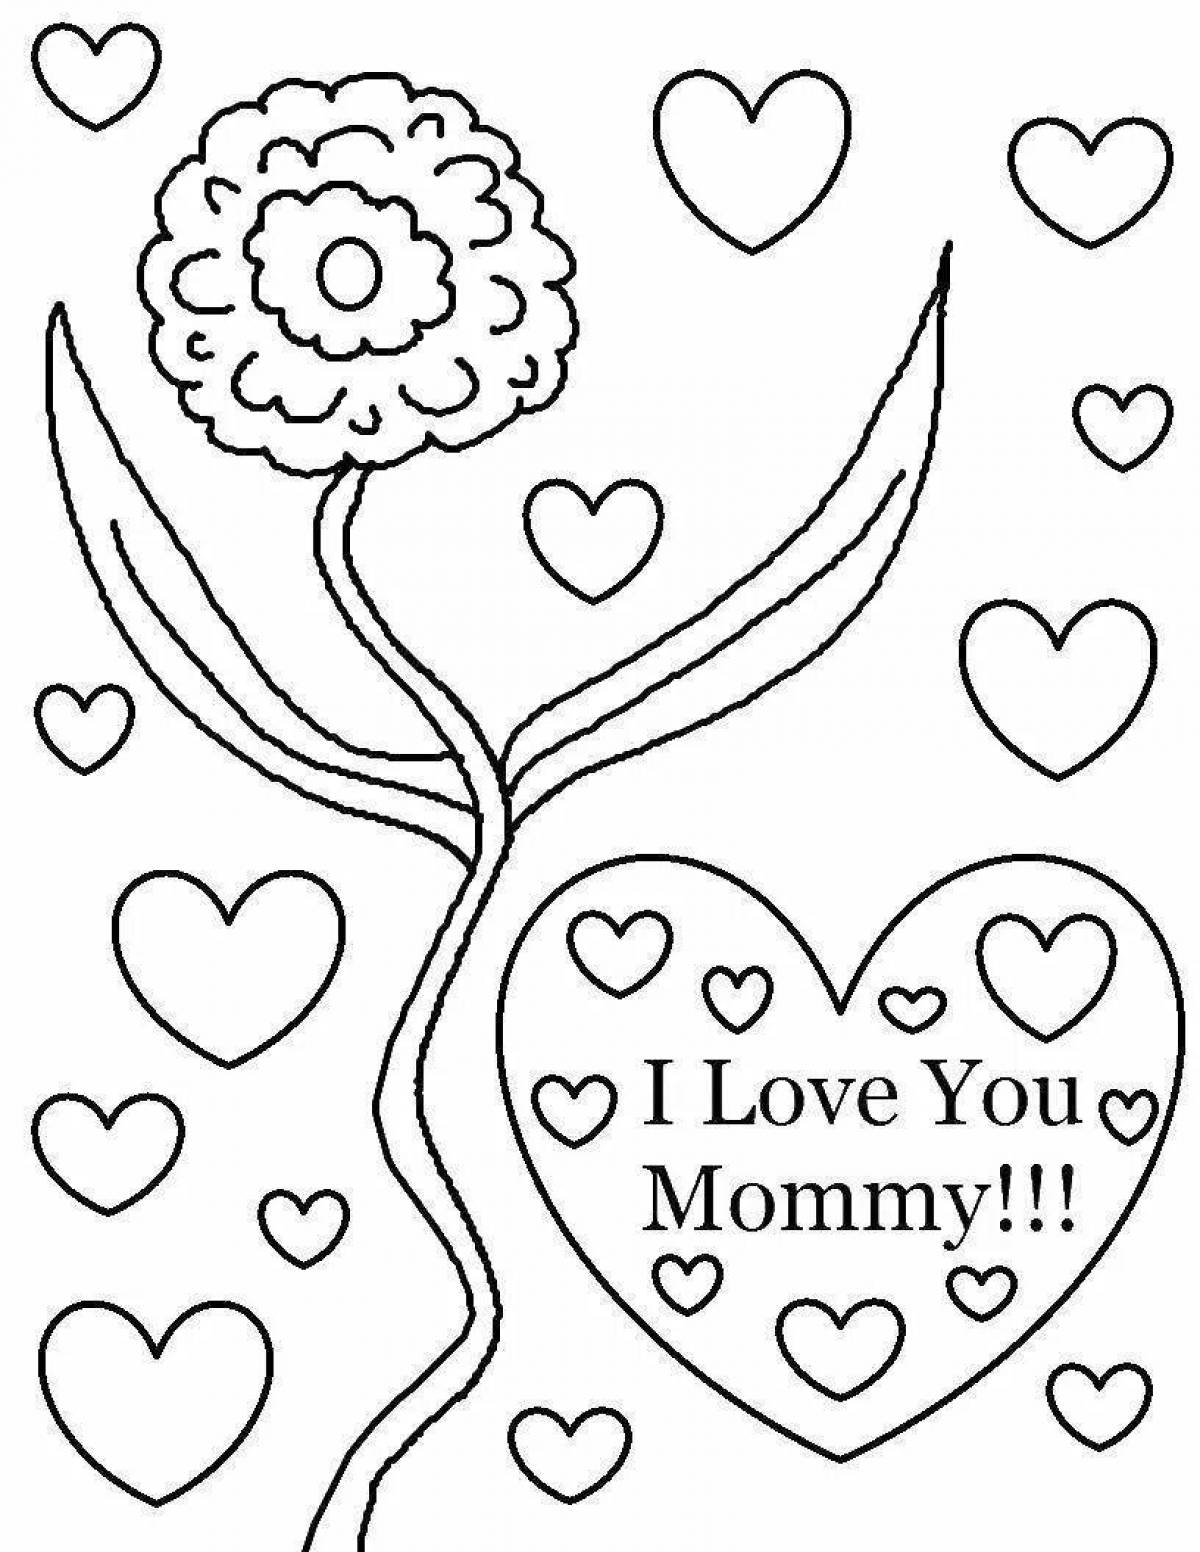 Luxury coloring book for mom from daughter